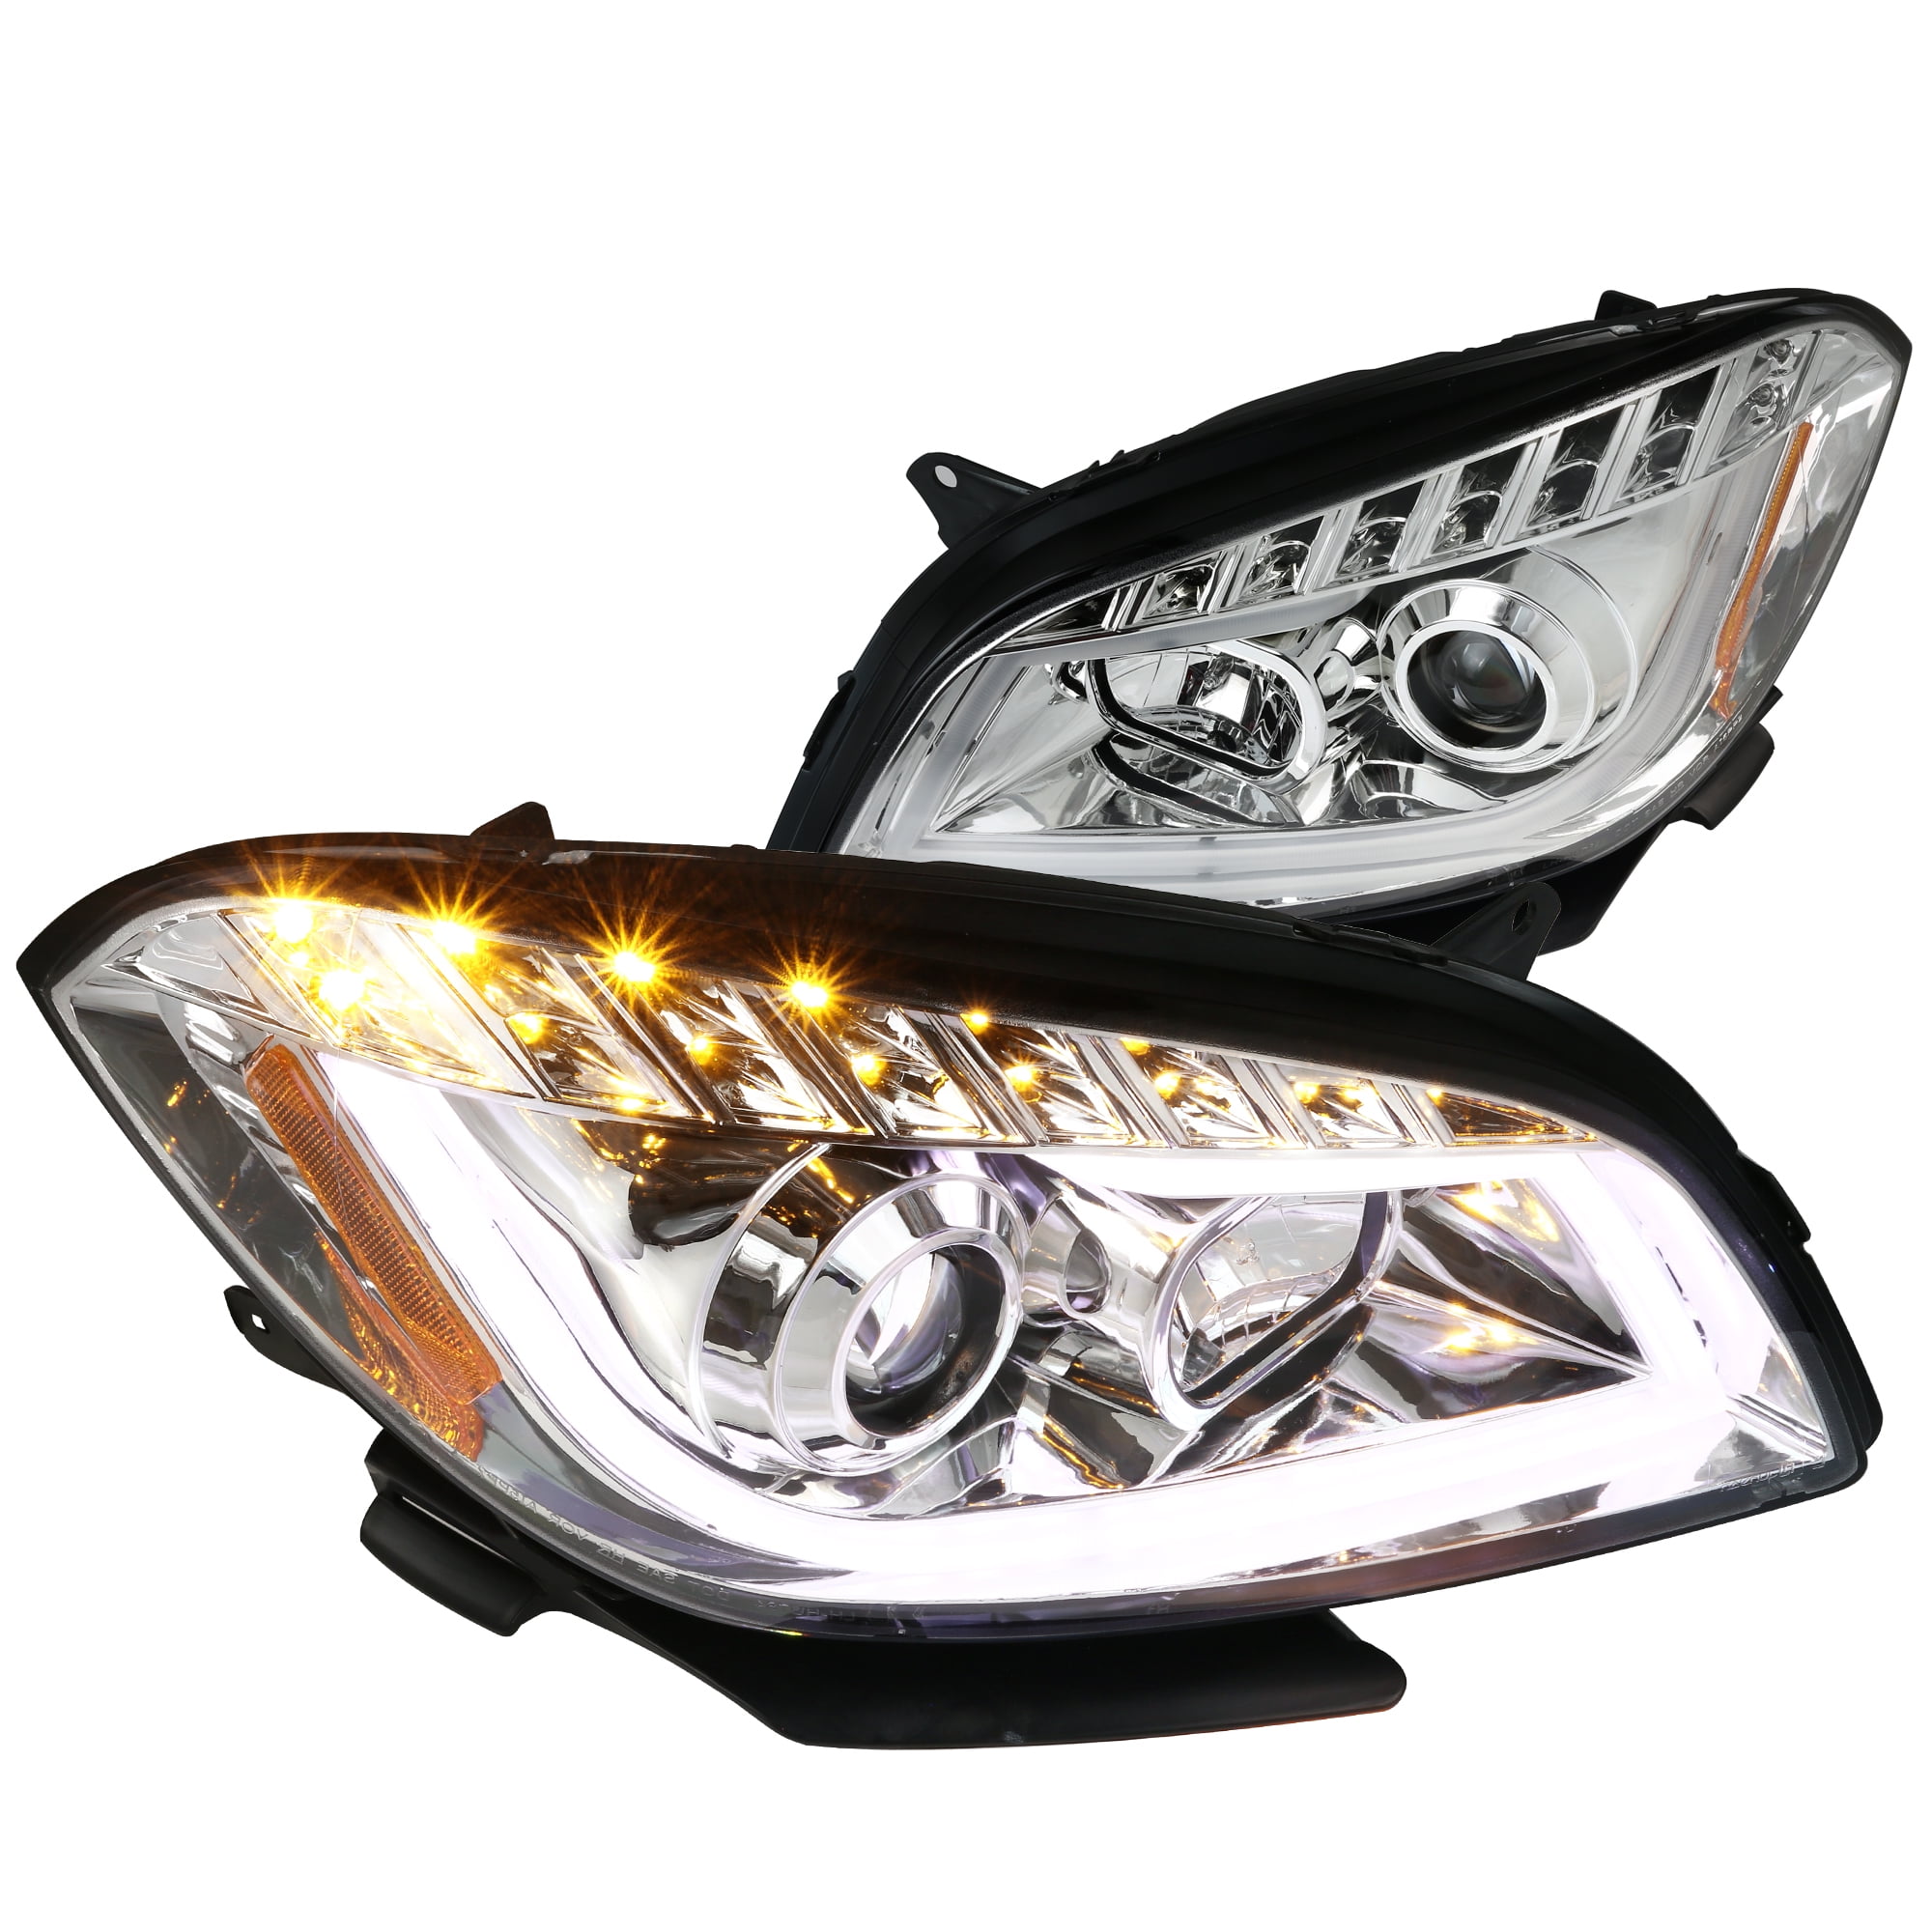 SpecD Tuning Led Signal Projector Headlights for 2008